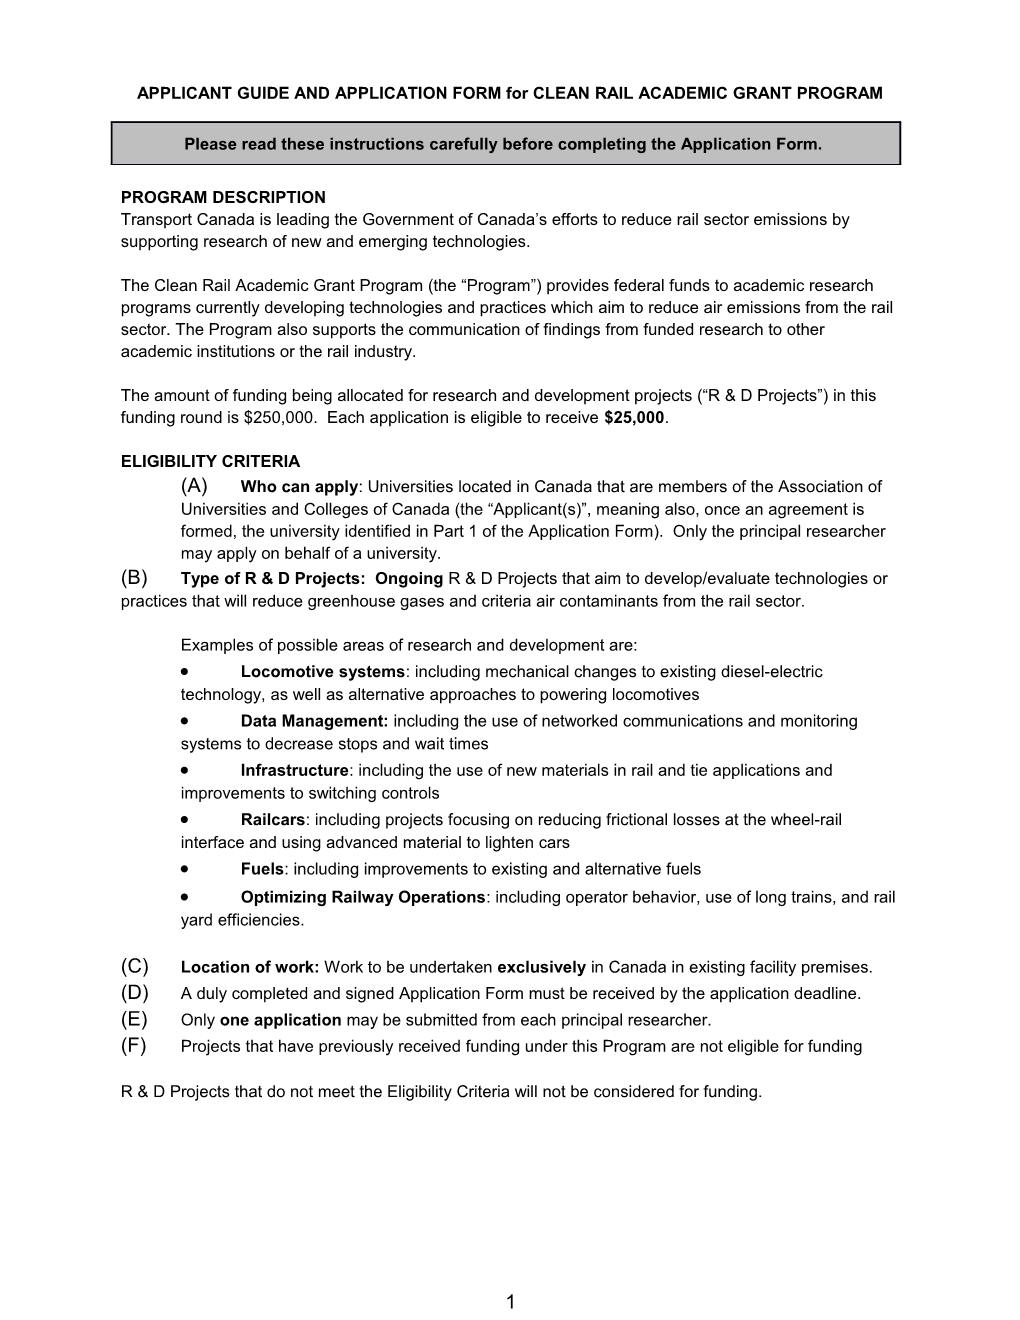 APPLICANT GUIDE and APPLICATION FORM for CLEAN RAIL ACADEMIC GRANT PROGRAM